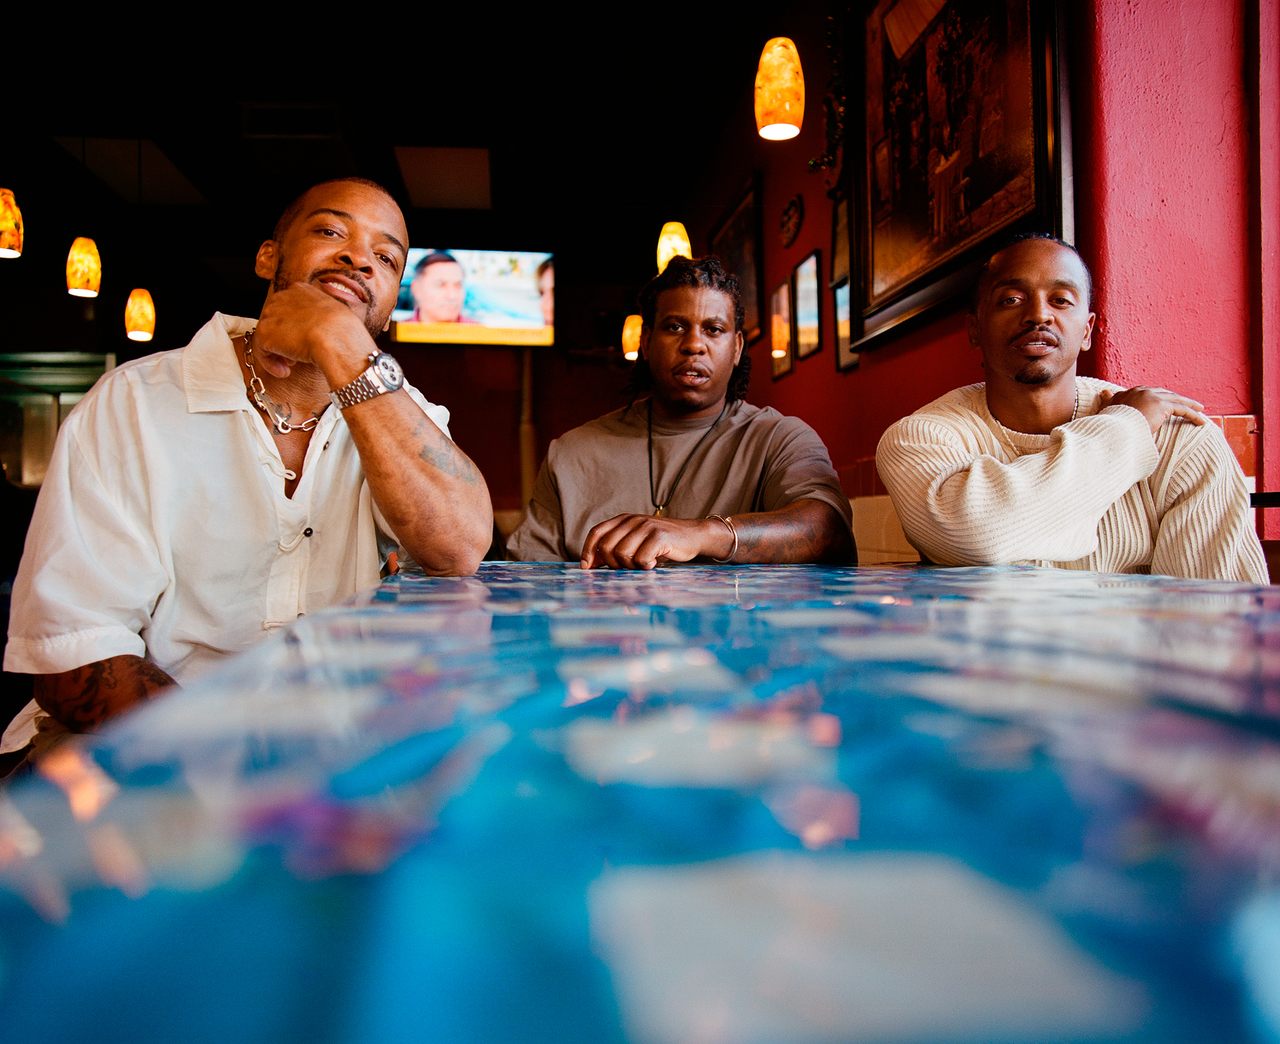 The Ghetto Gastro collective tells the story of the Bronx through food. From left: Lester Walker, Jon Gray, and Pierre Serrao.